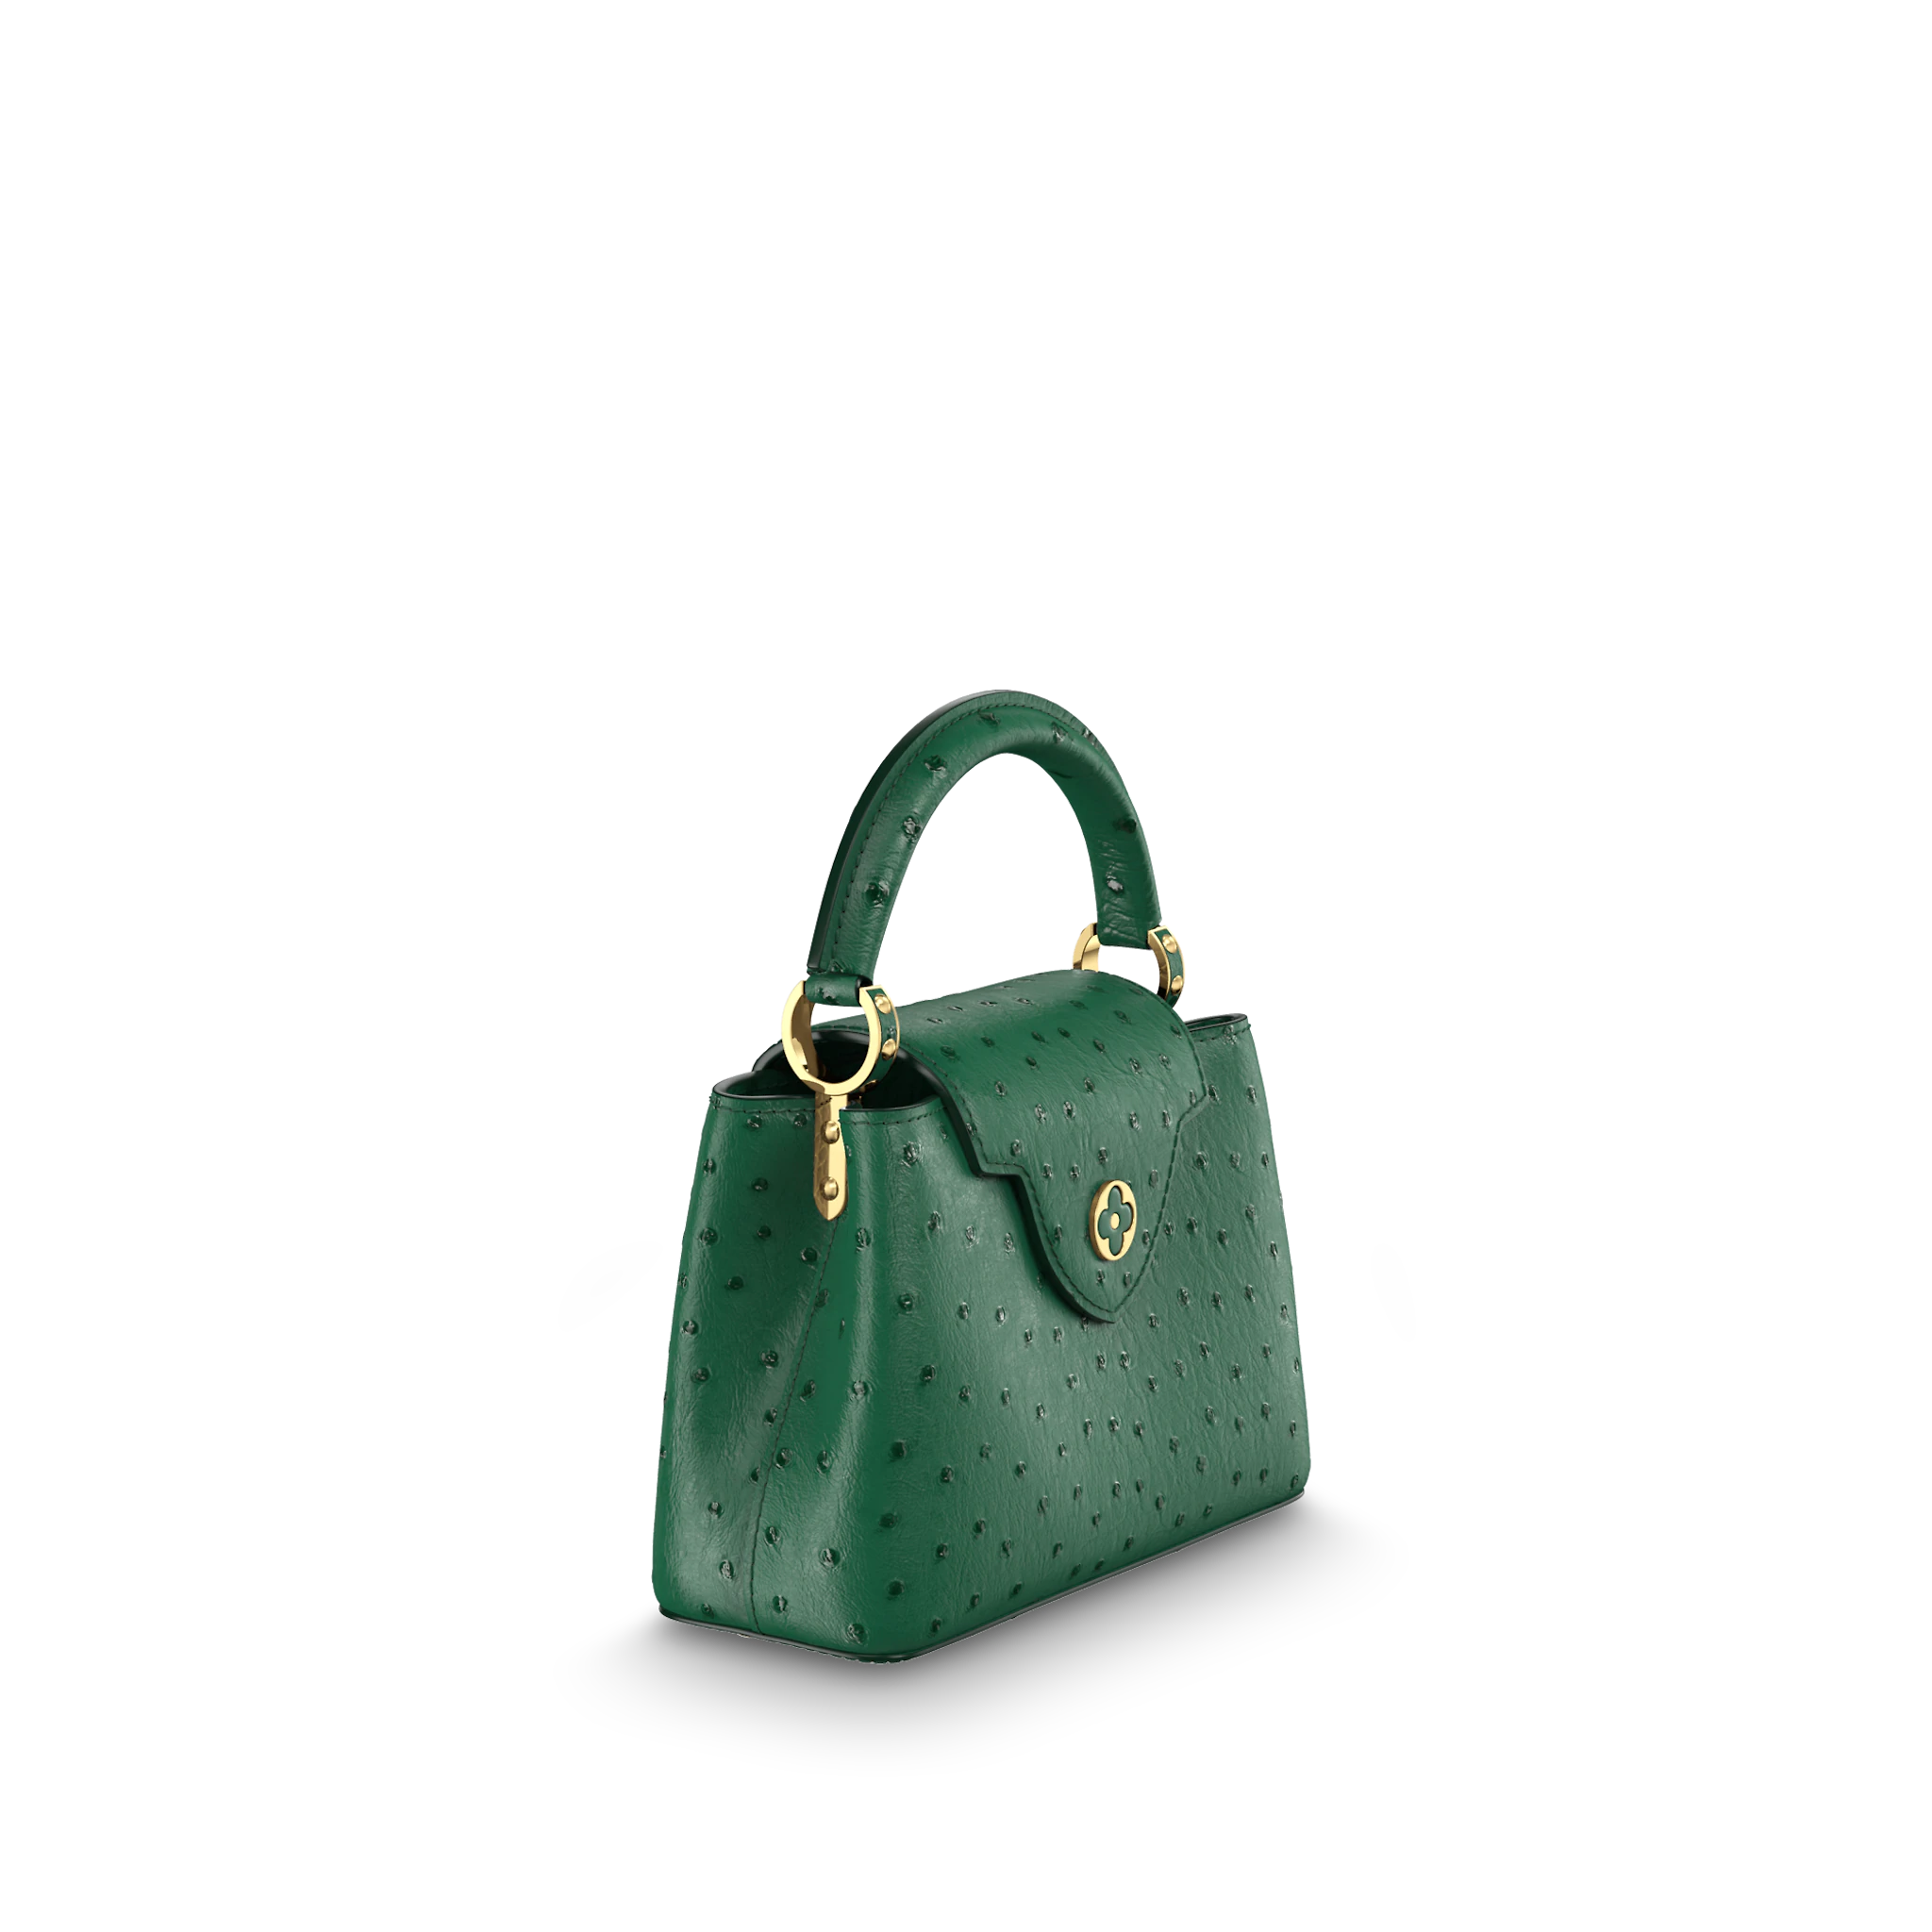 Help me locate this Green Capucines Mini Bag in UK, seems to be